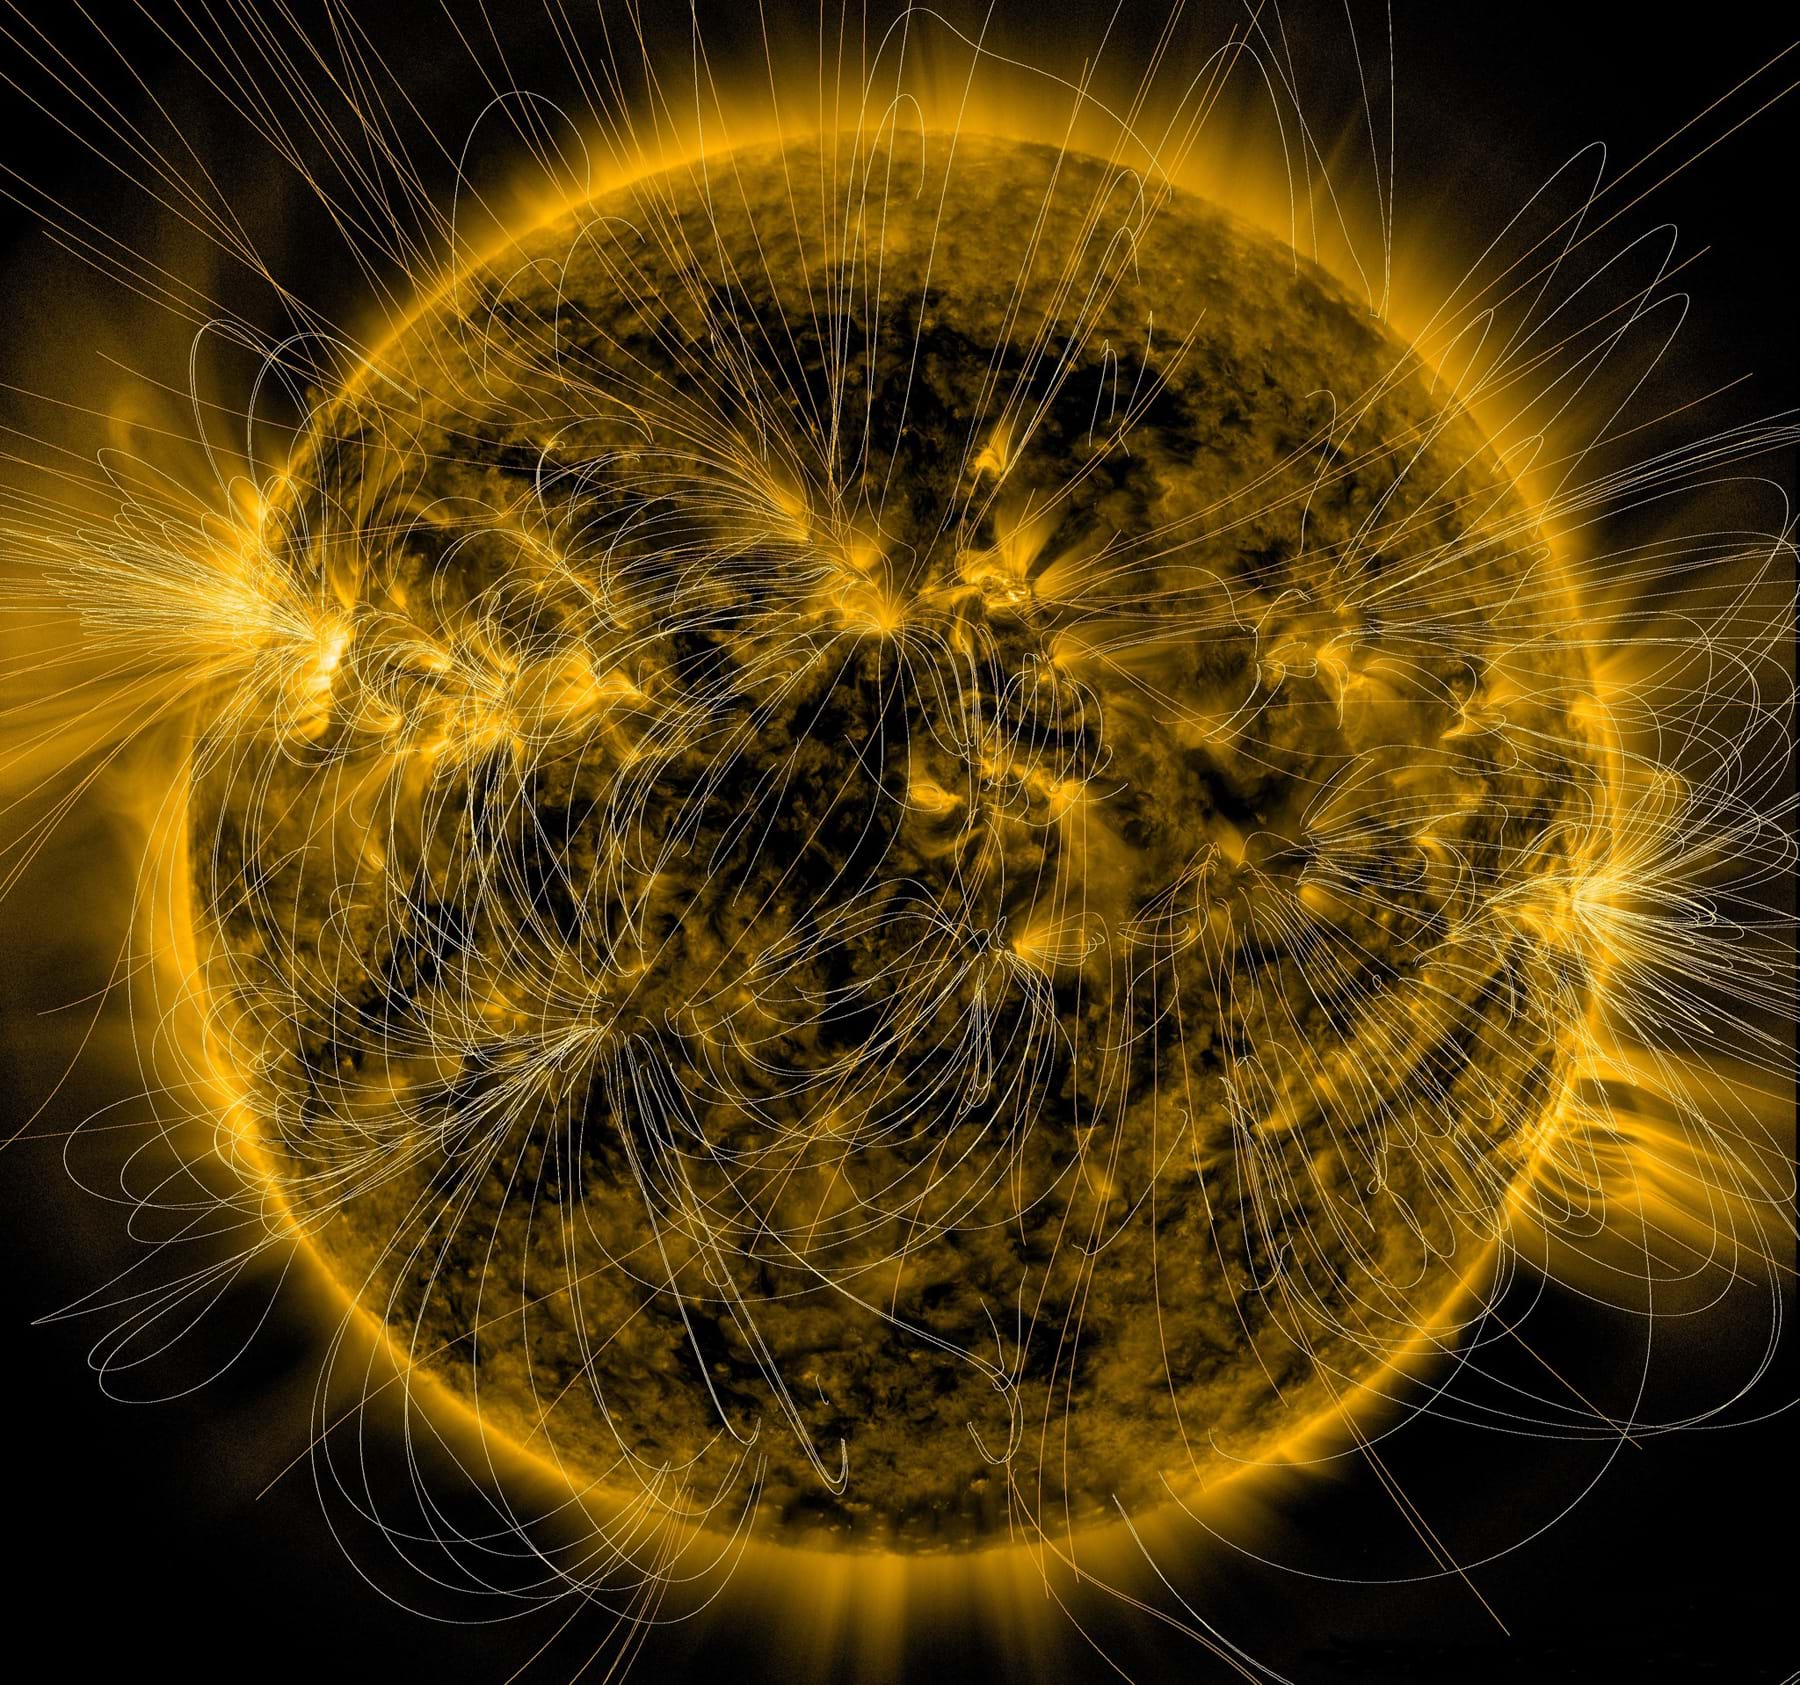 Drawing shows arcs of yellow light looping every which way across the curved shape of the Sun.